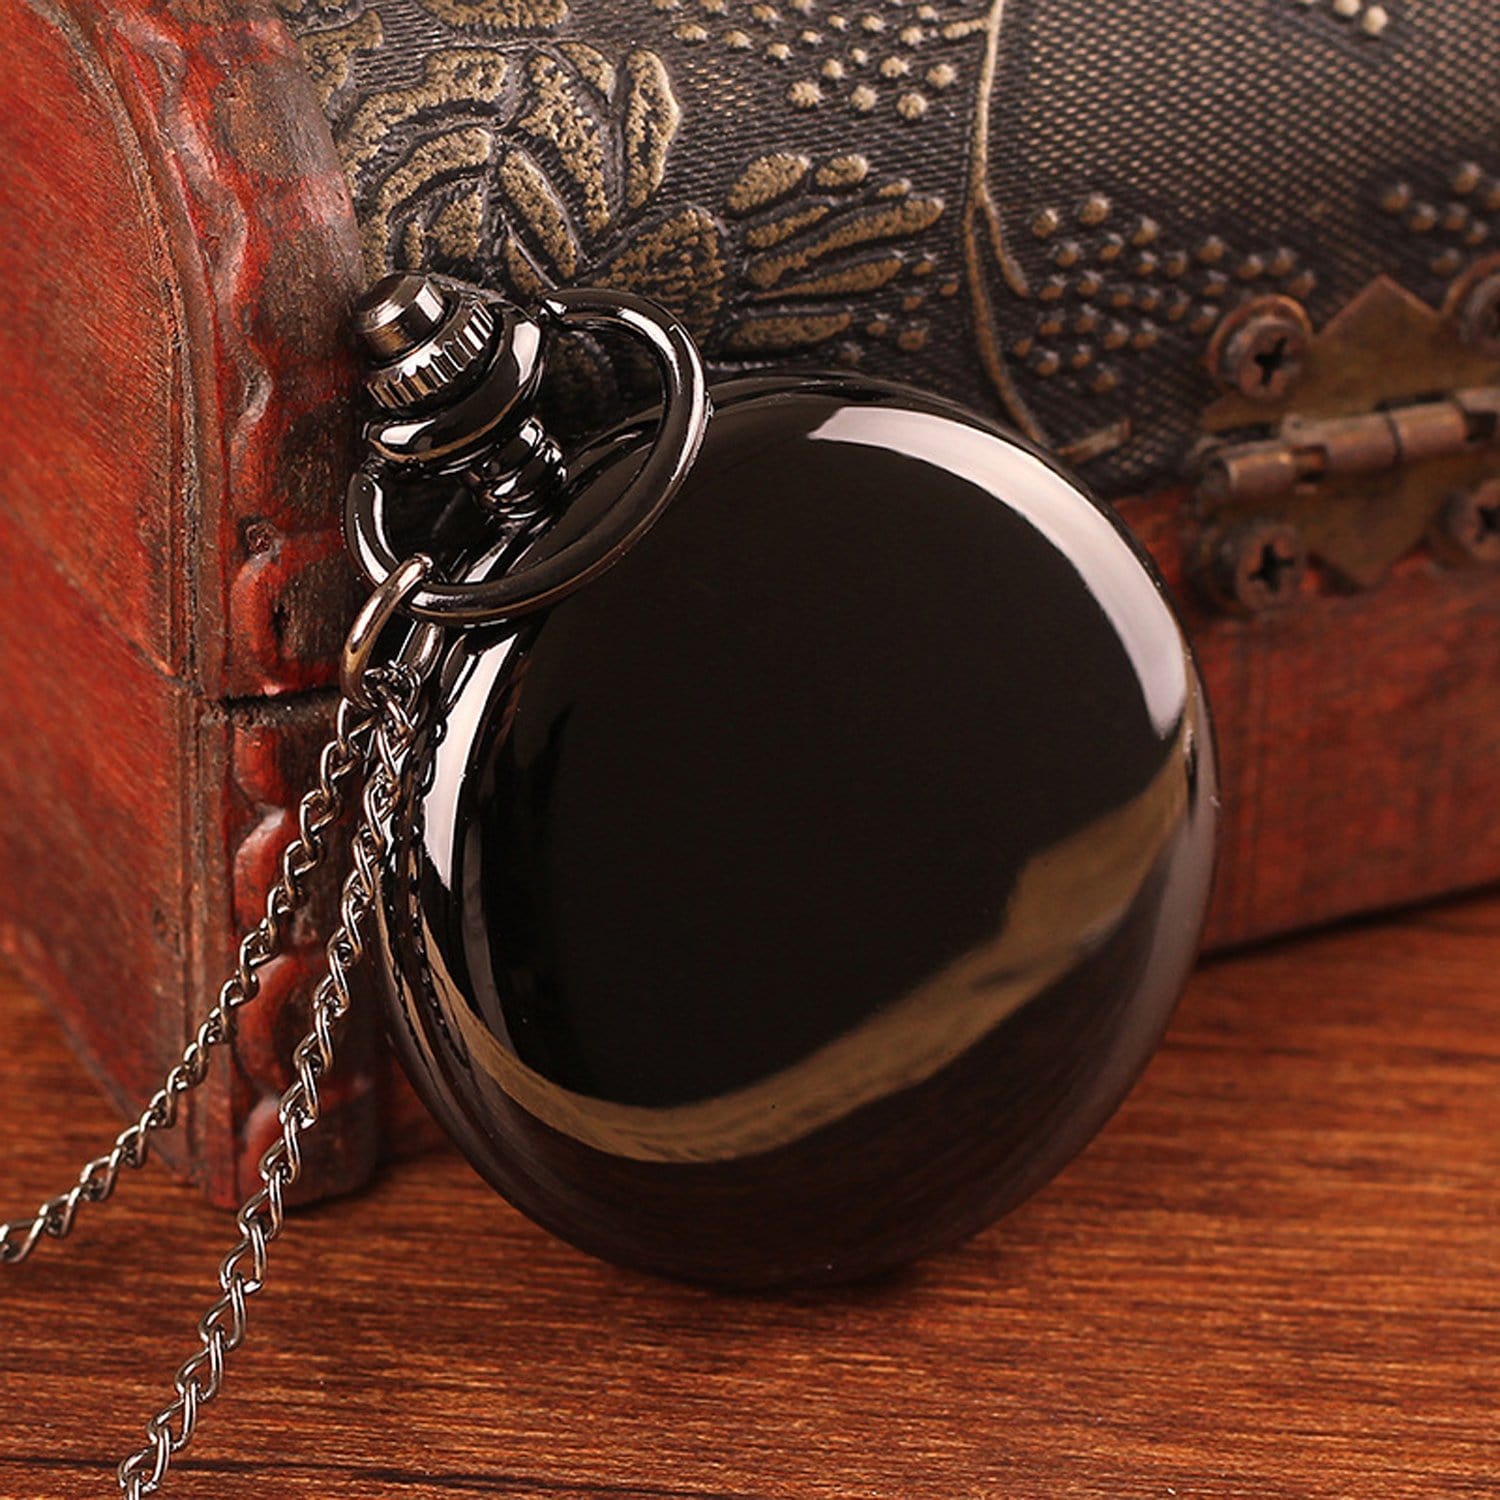 Pocket Watches To My Husband - Loving You Is My Life Pocket Watch GiveMe-Gifts